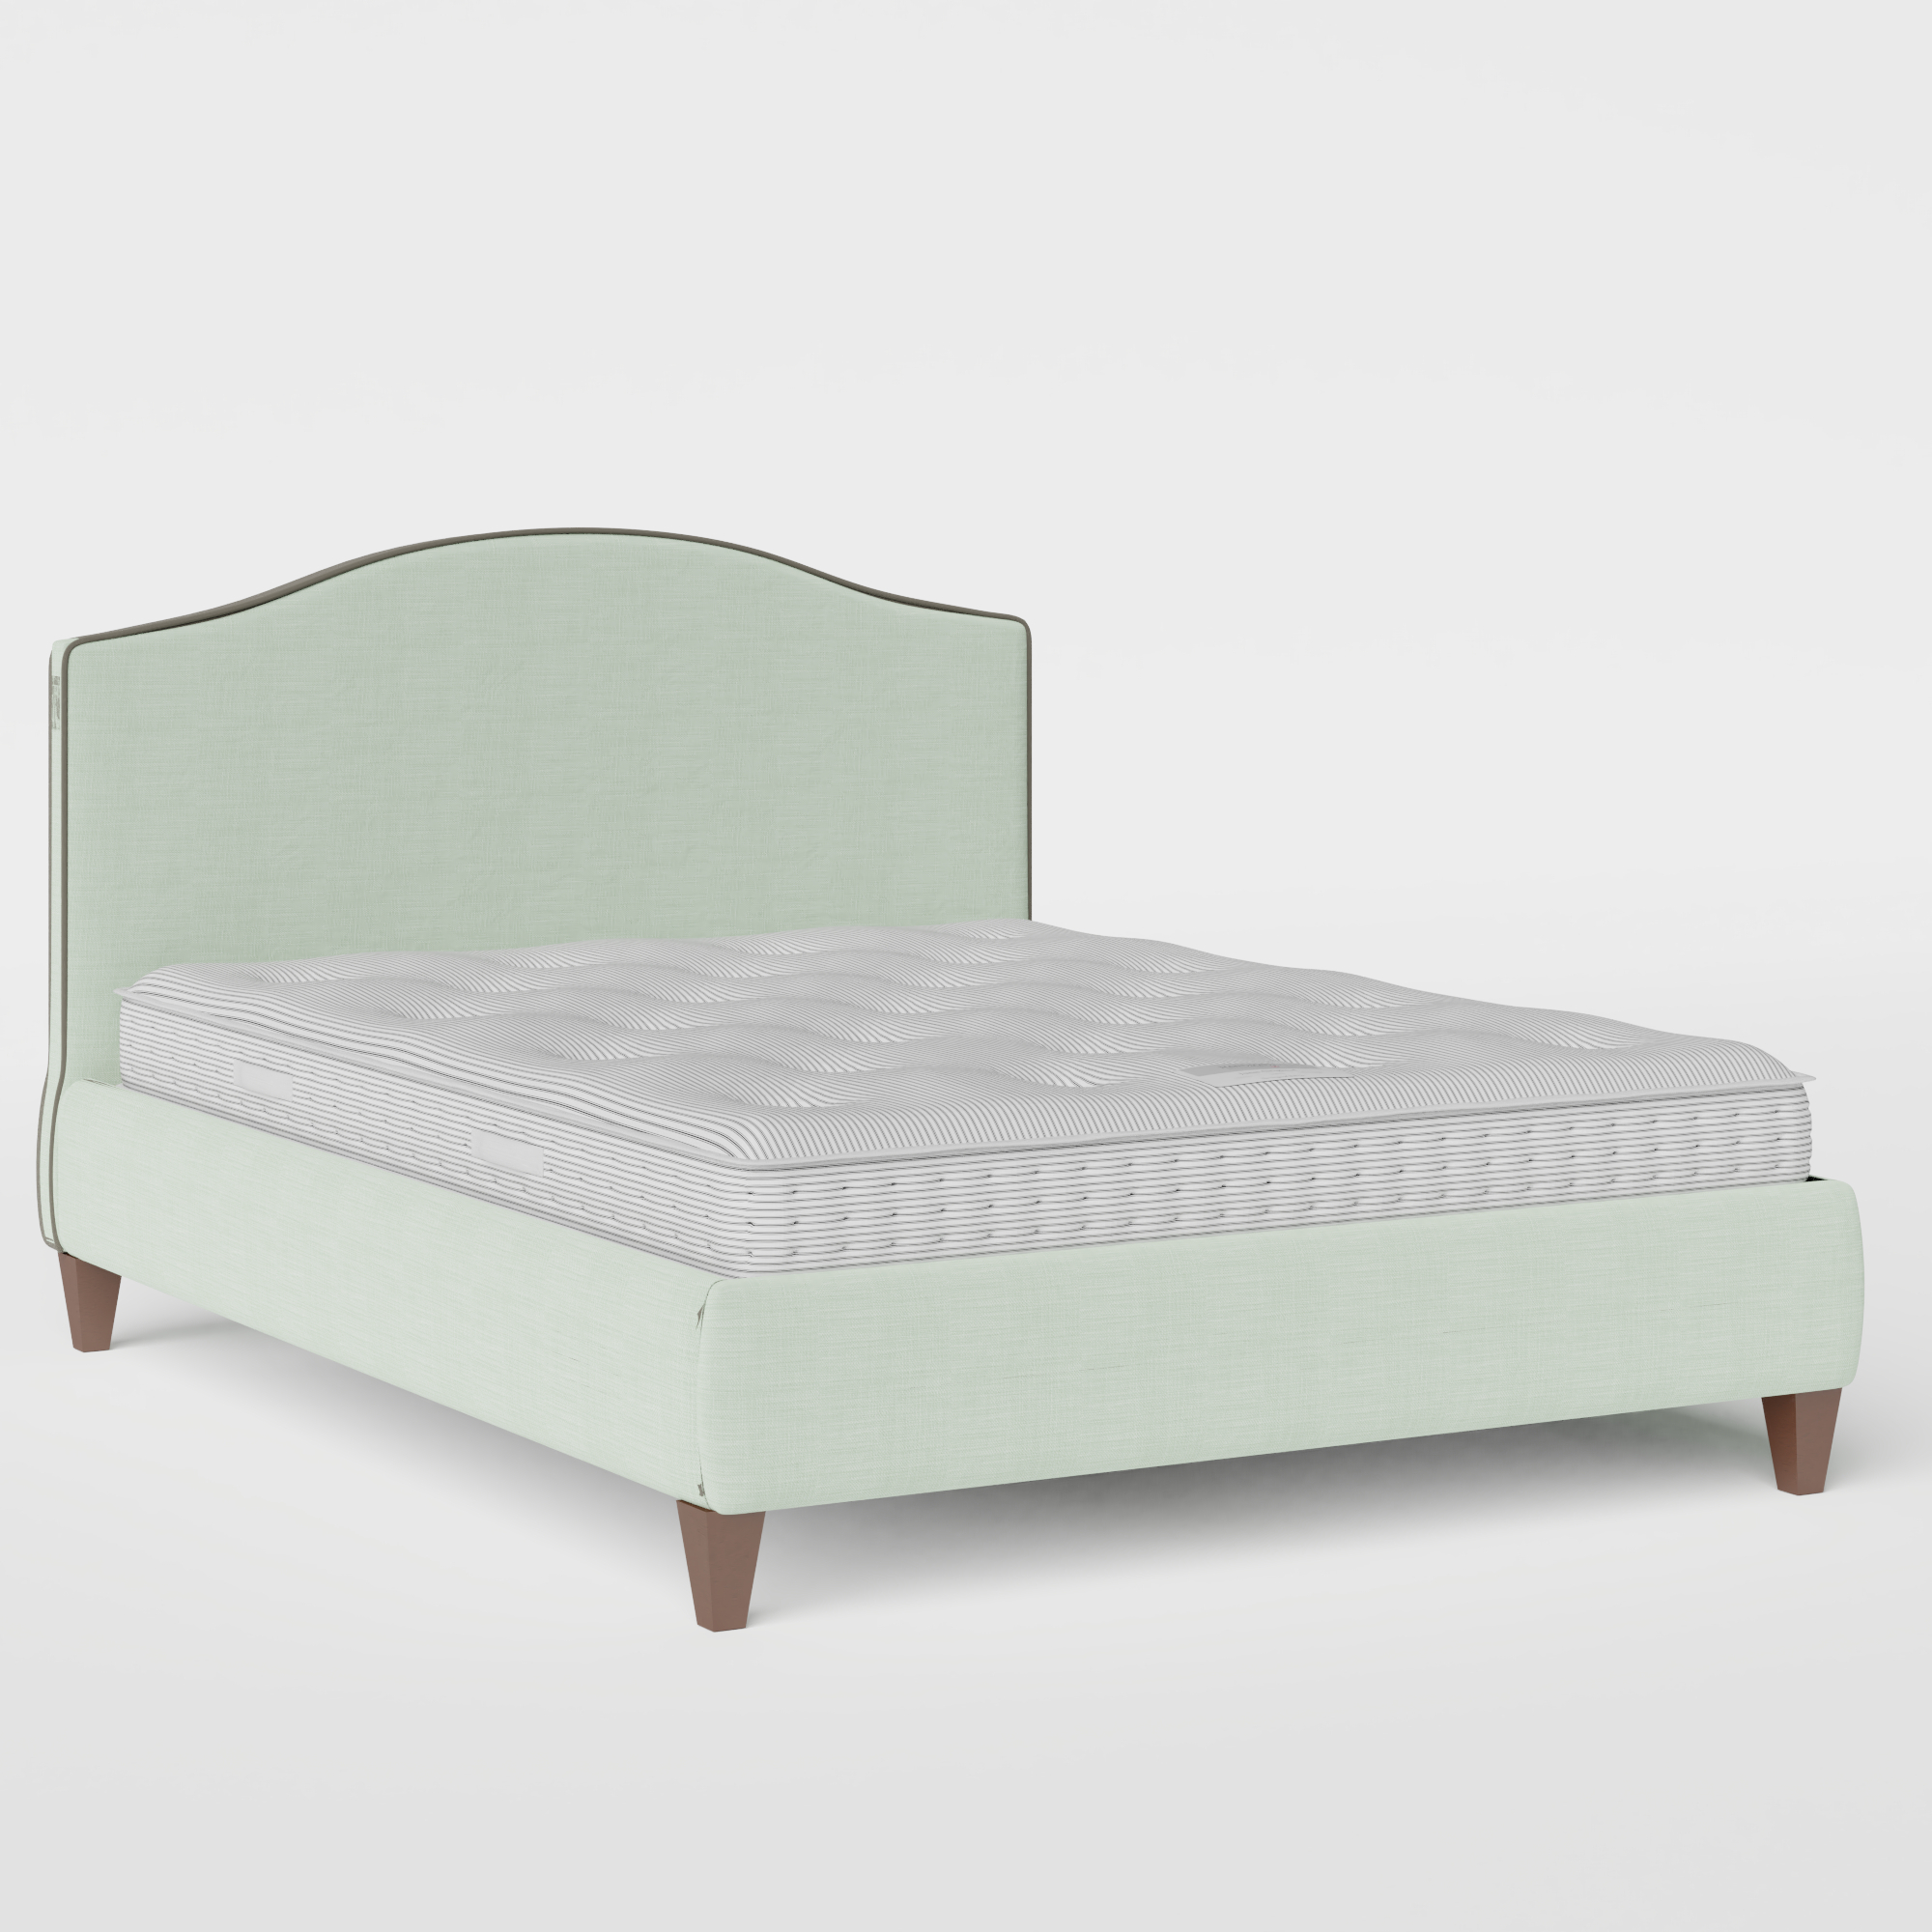 Daniella with Piping stoffen bed in duckegg